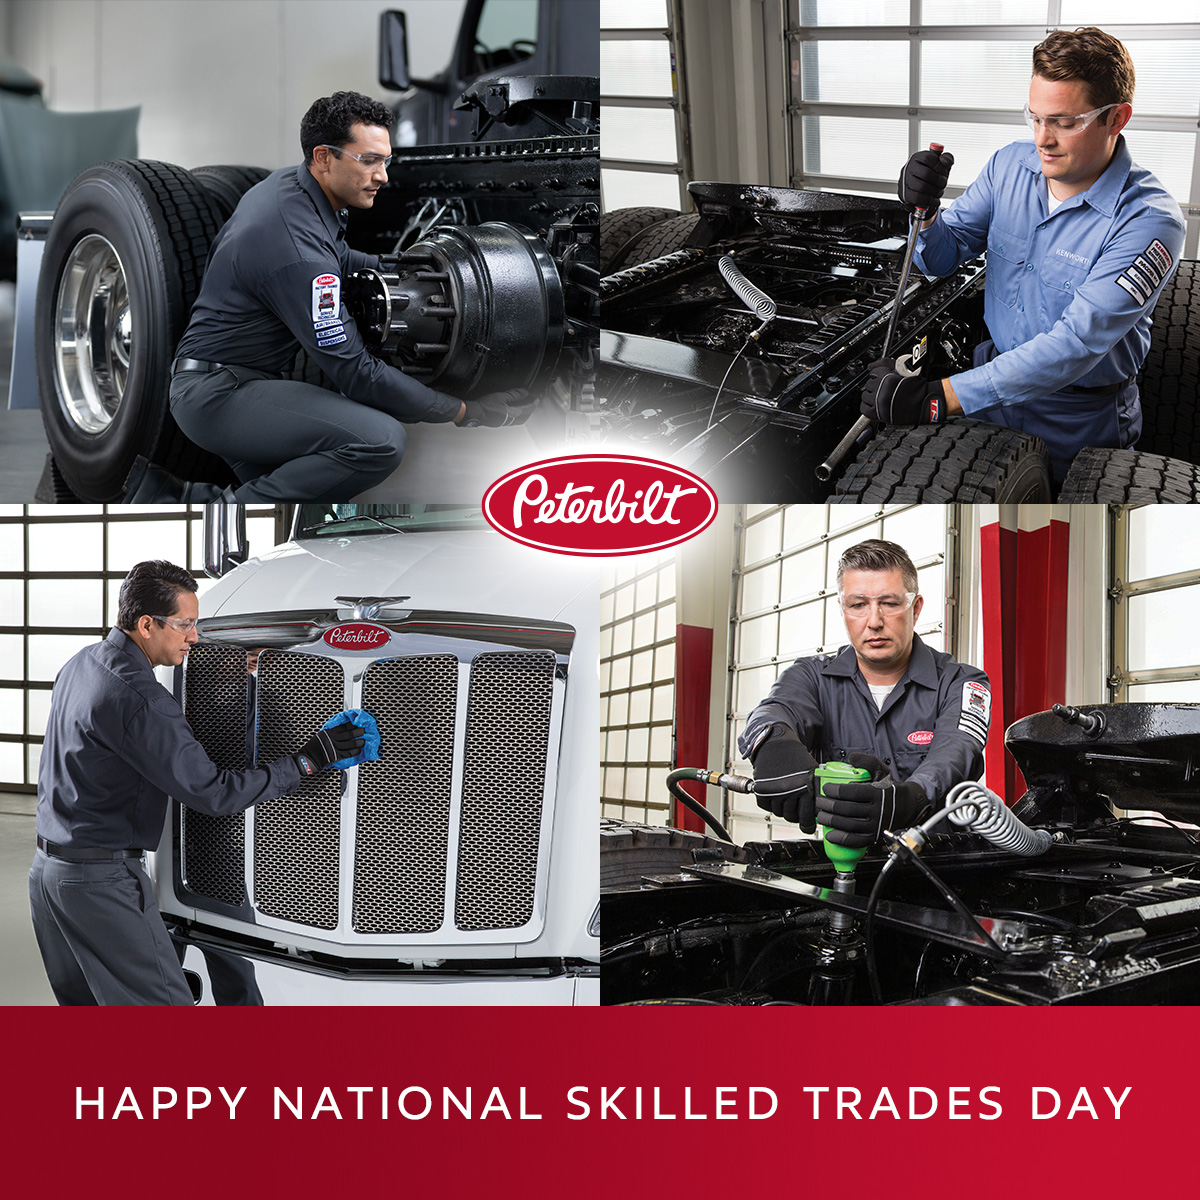 This National Skilled Trades Day, we celebrate every technician, fabricator and mechanic who help Peterbilt trucks deliver unparalleled performance. Your dedication keeps us moving forward! #Peterbilt #PeterbiltTrucks #PeterbiltPride #ClassPays #NationalSkilledTradesDay